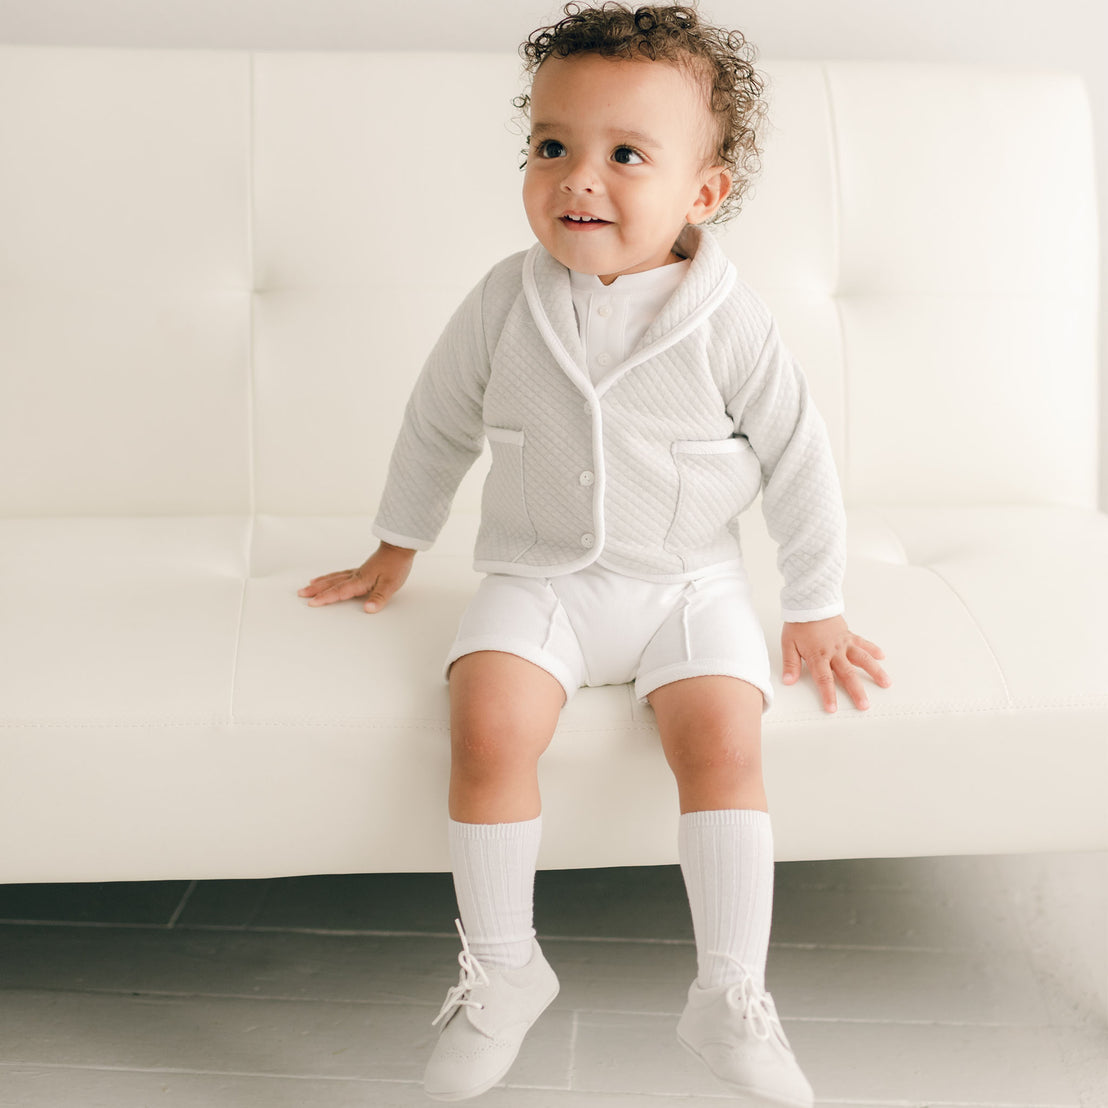 Baby boy sitting on a white couch and wearing the grey Asher 3-Piece Suit, including a folded collar jacket, white pants and a onesie with buttons.